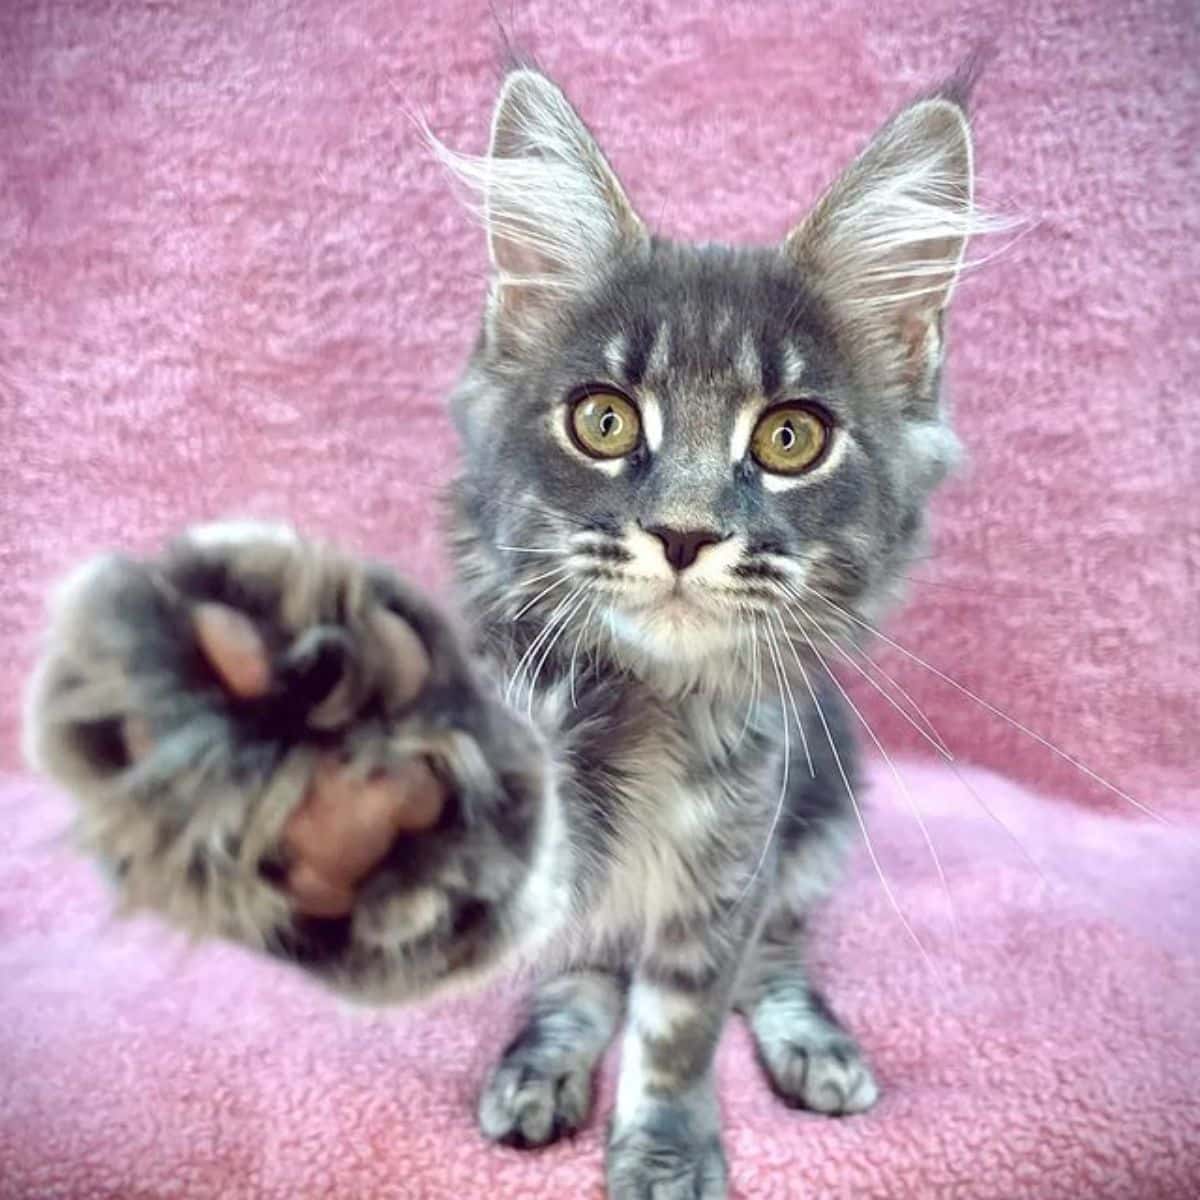 A tabby maine coon kitten sitting on a pink couch.